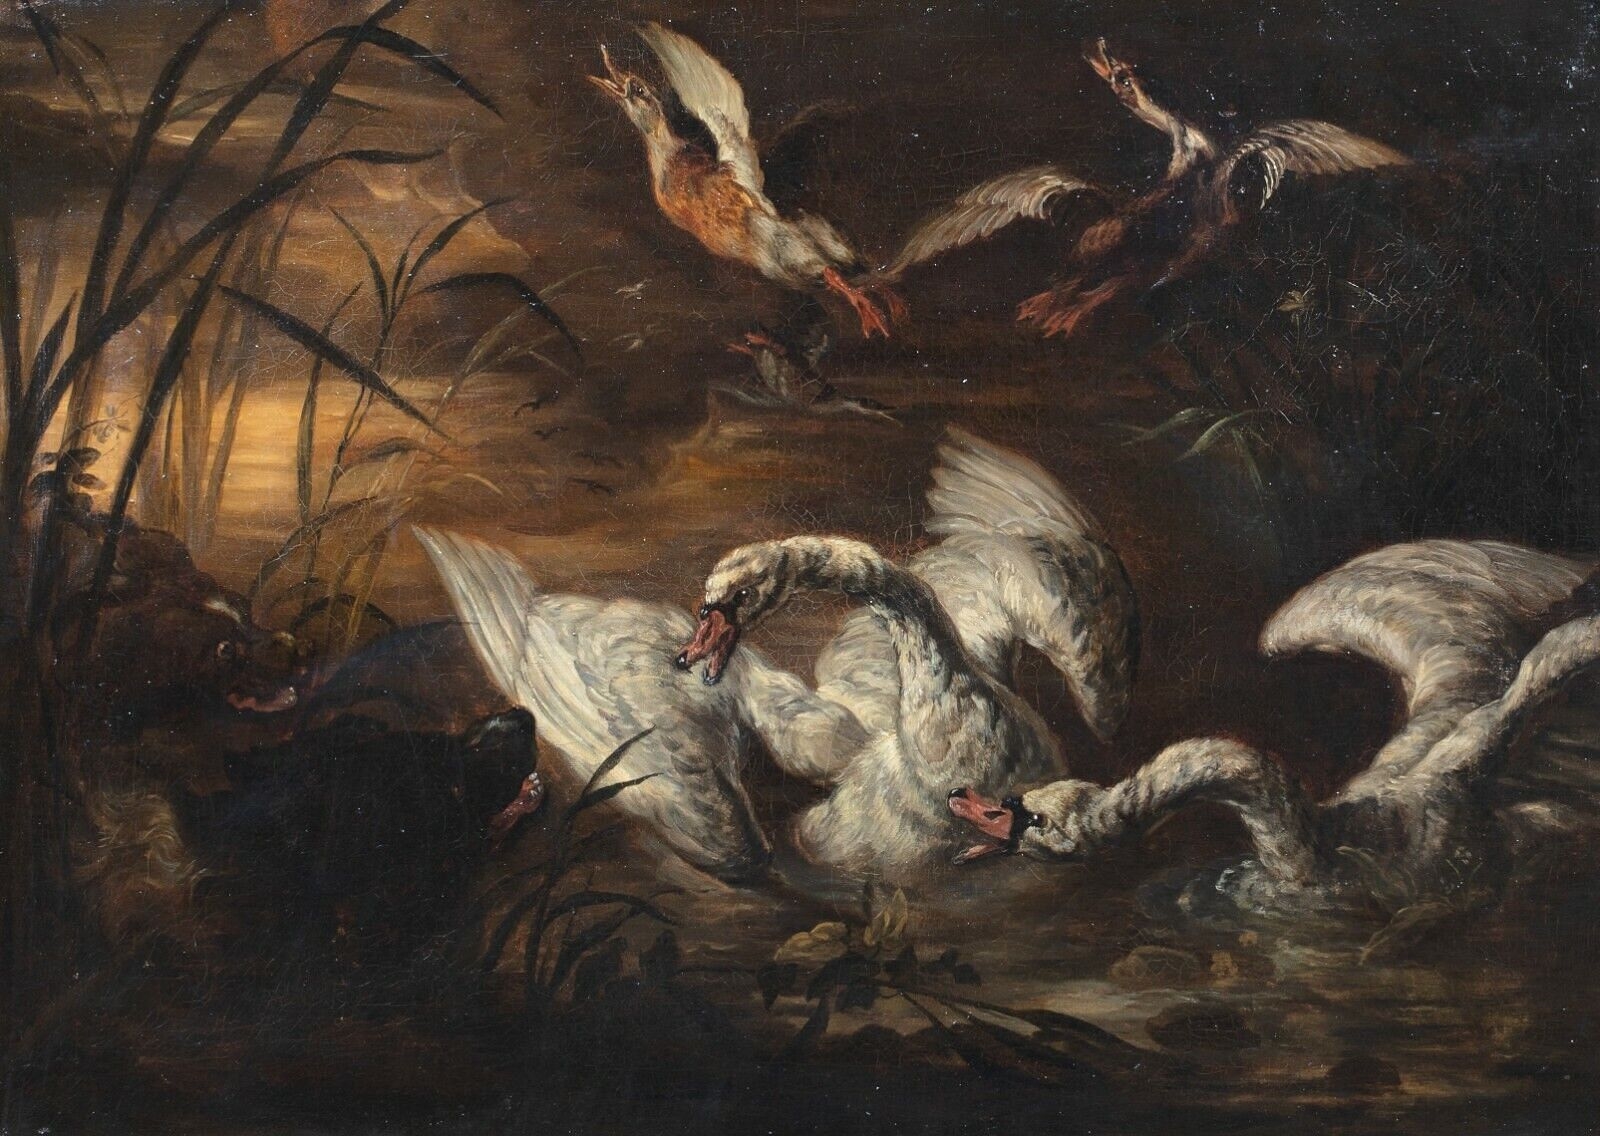 DOGS ATTACK SWANS & DUCKS OIL PAINTING by Abraham Hondius, 17th century